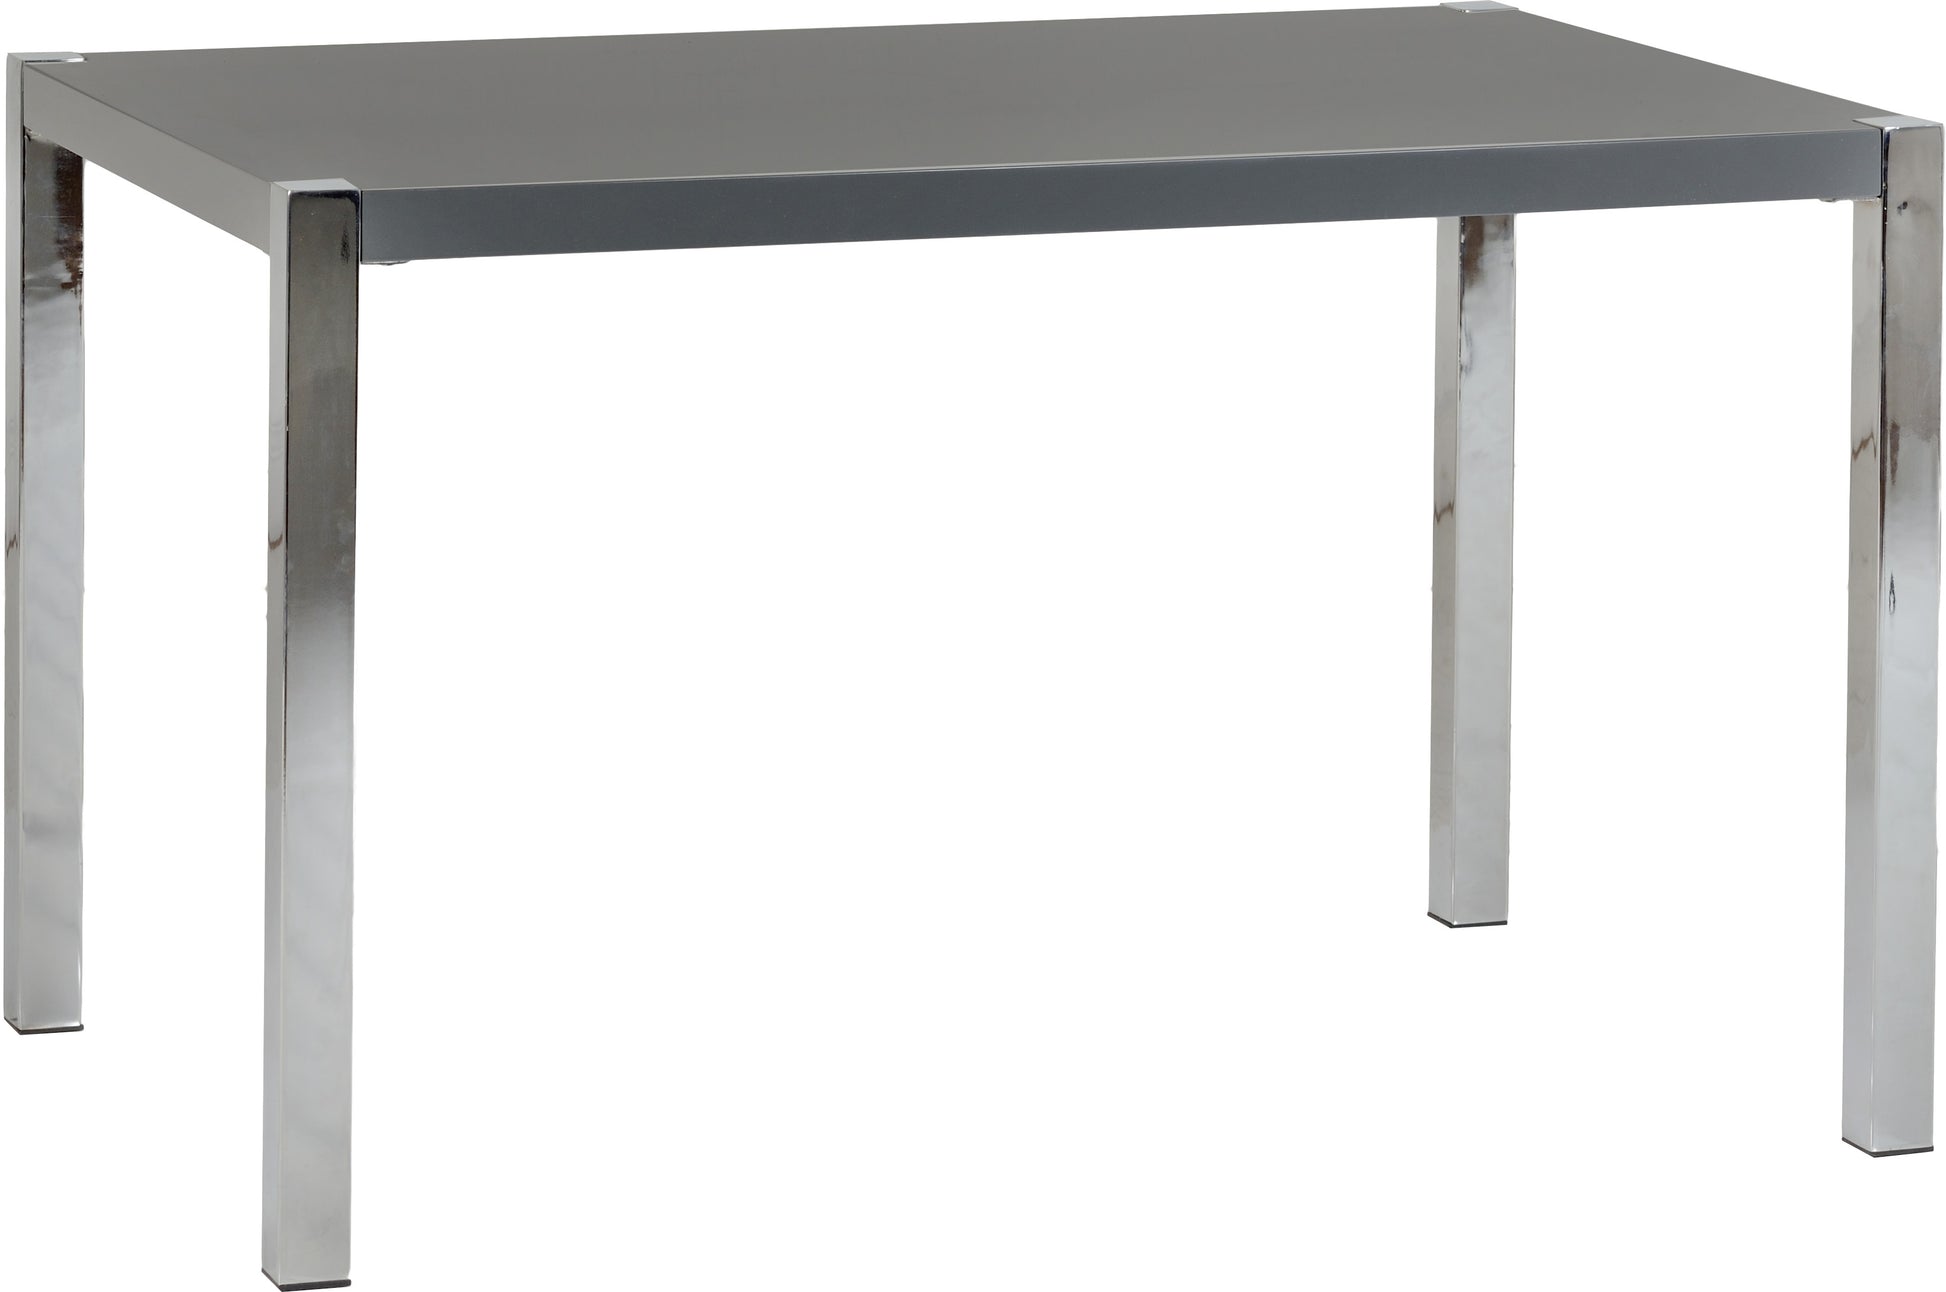 Charisma 4' Dining Table - Grey Gloss/Chrome - The Right Buy Store